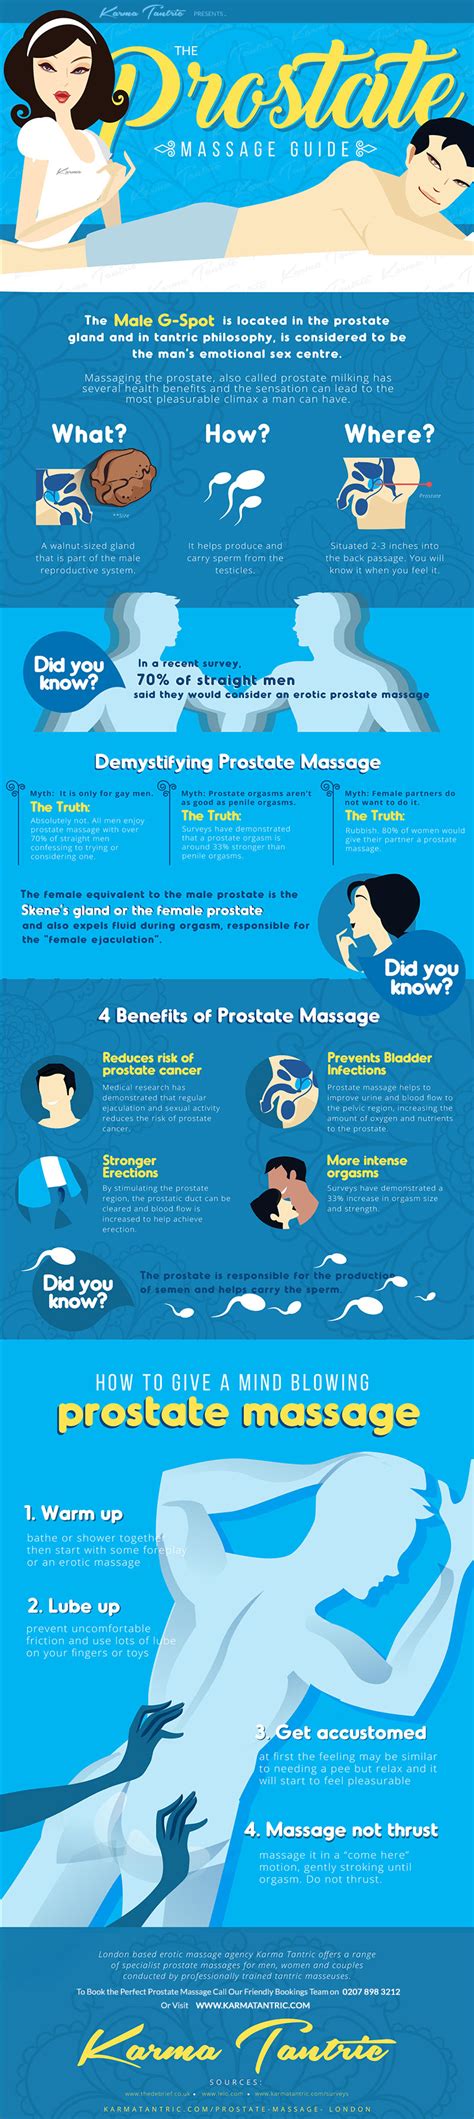 The Ultimate Prostate Massage Guide Infographic